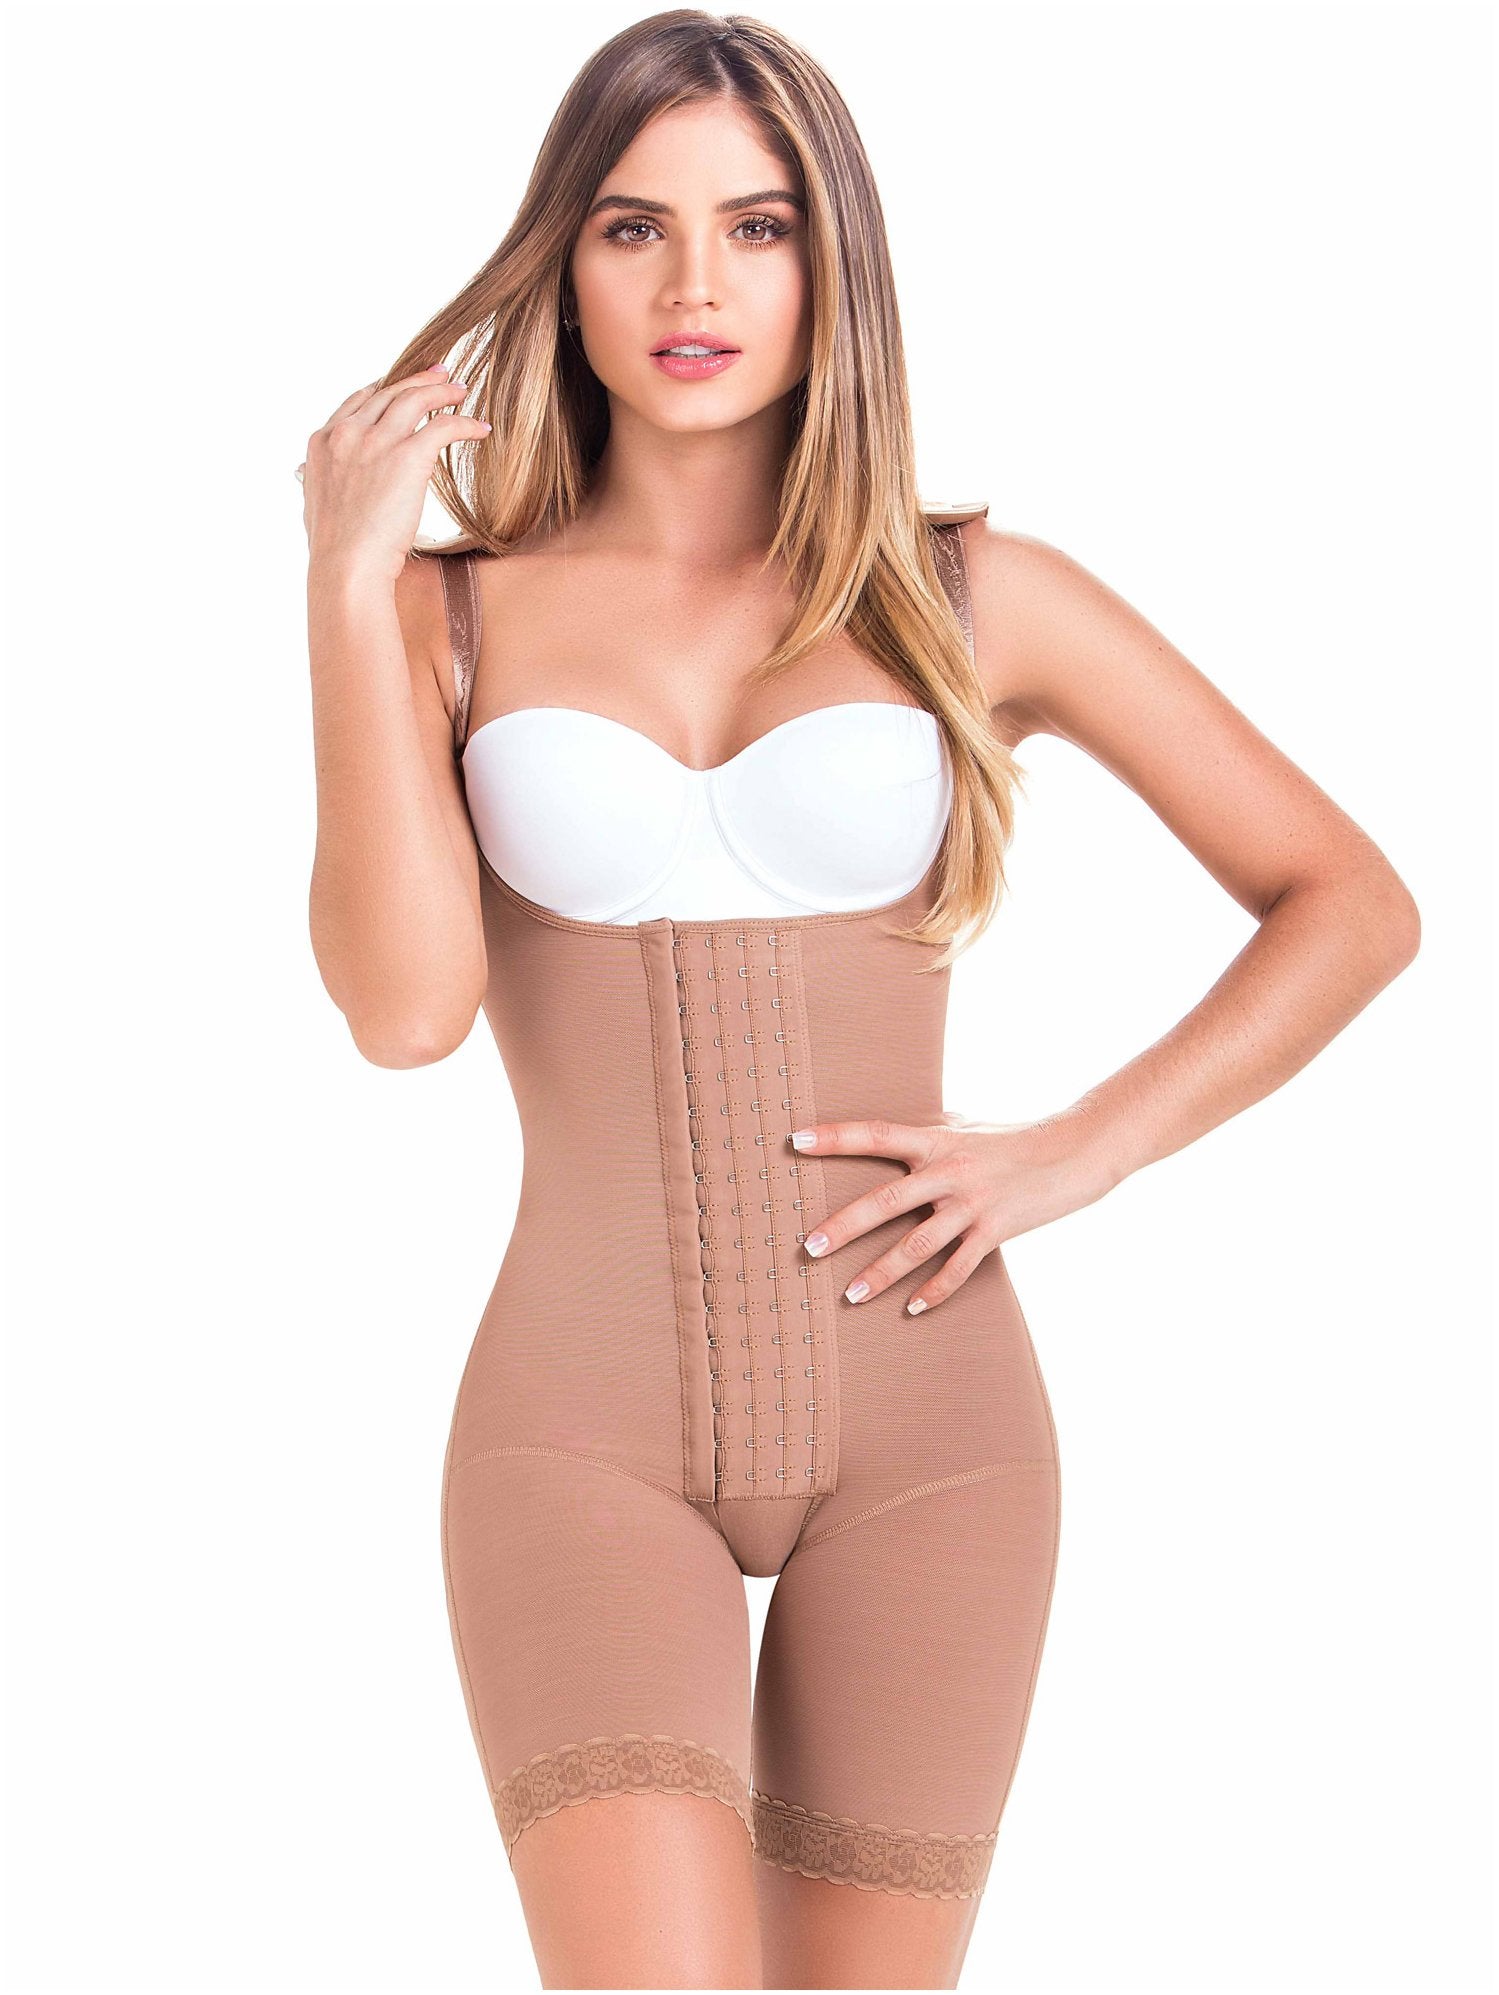 MARIAE 9632 Fajas Colombianas Postparto Levanta Pompis Reductoras y  Moldeadoras Colombian Strapless Csection Postpartum Girdle Butt Lifter  Shapewear Beige XS at  Women's Clothing store